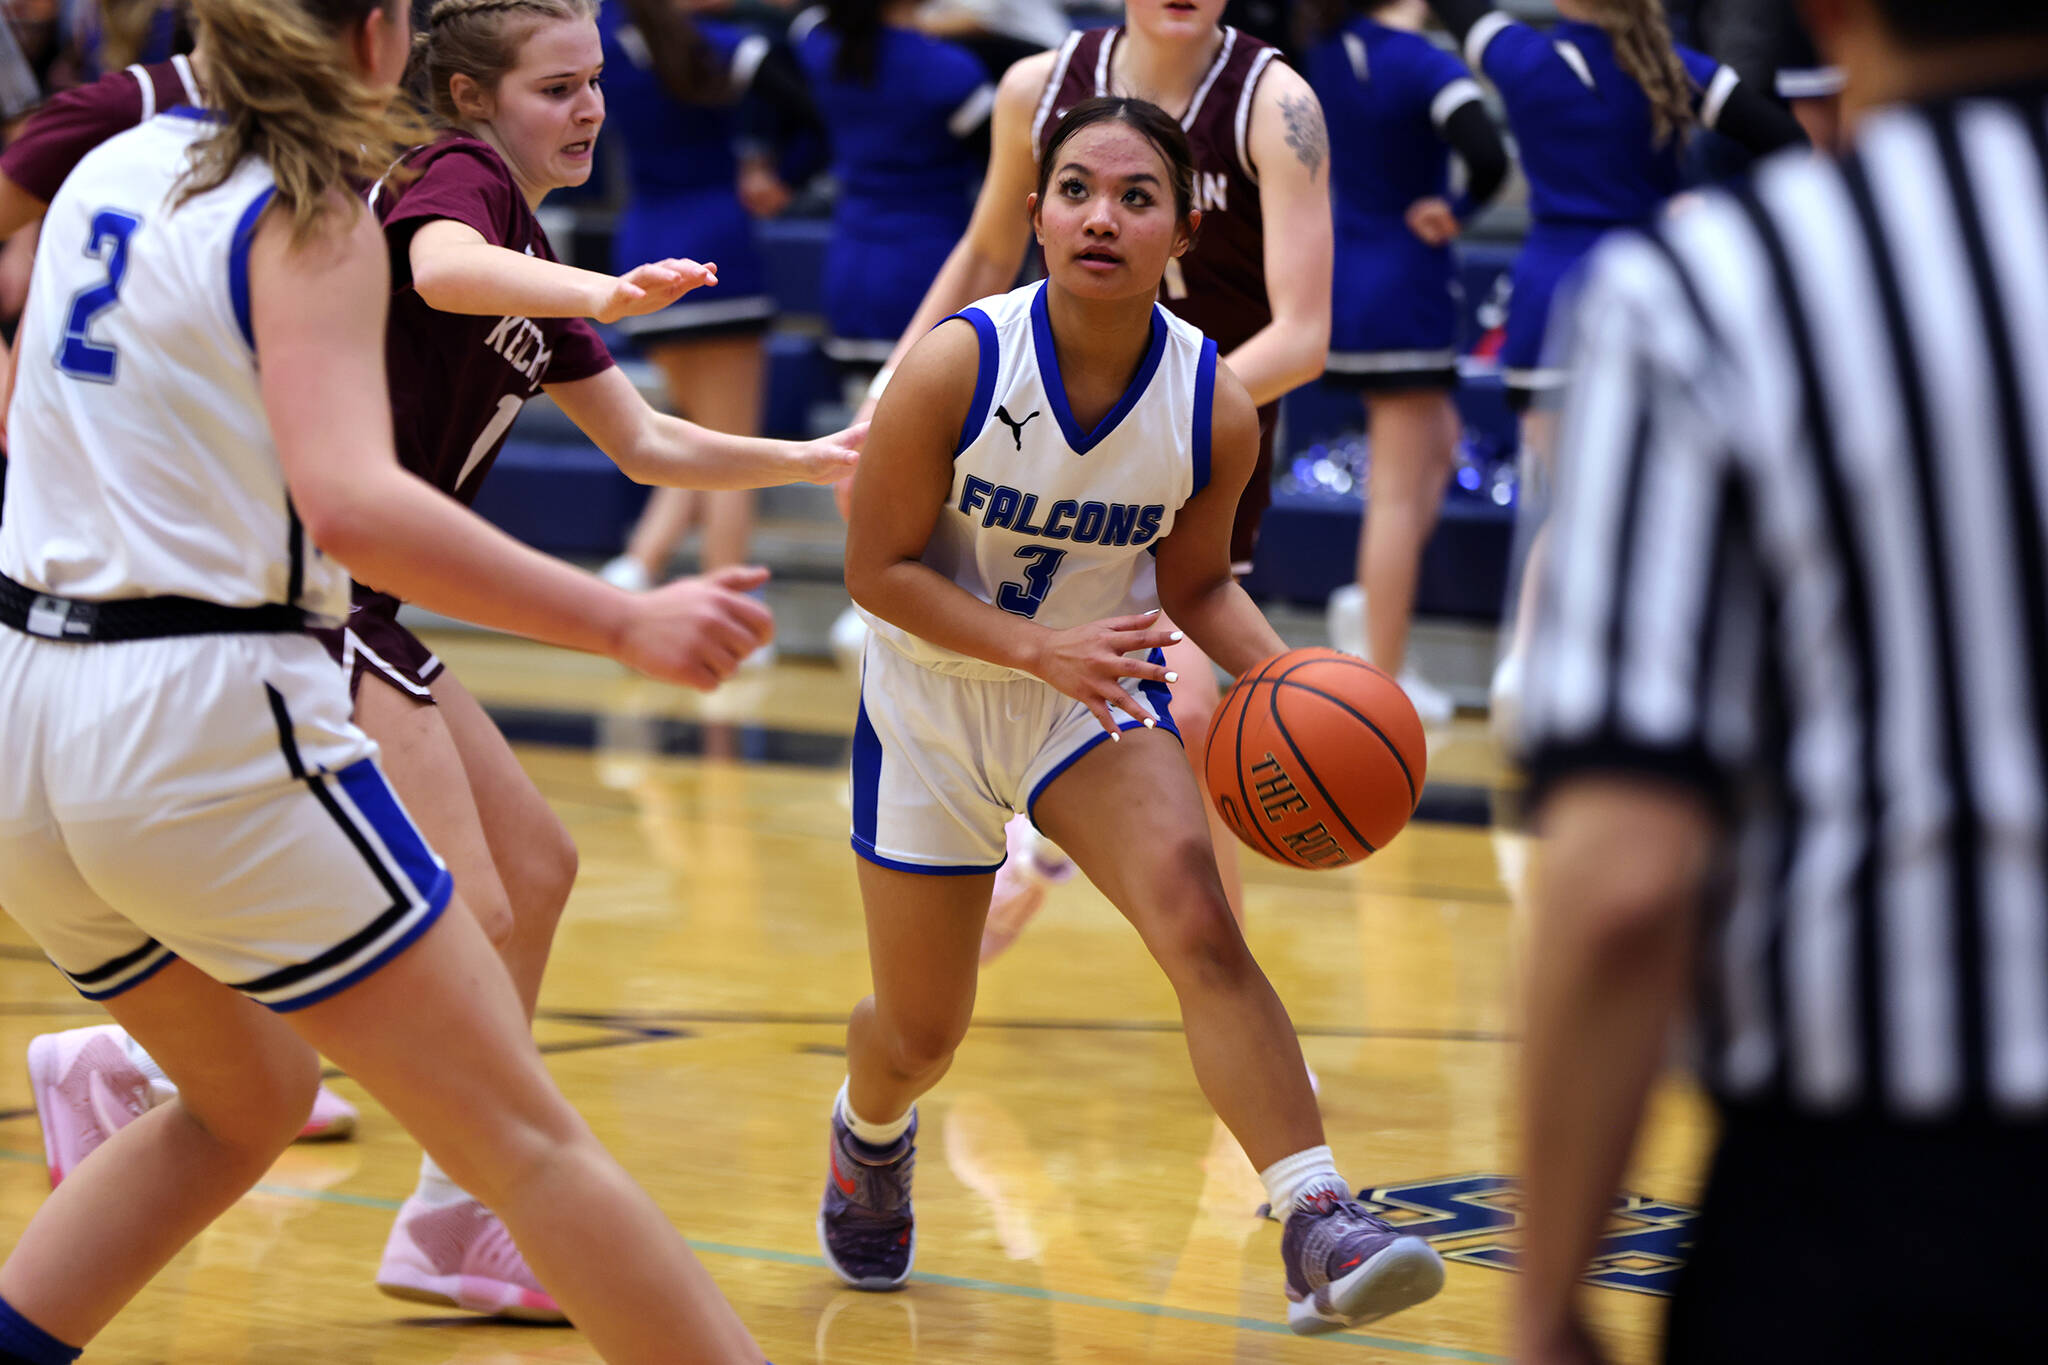 Junior Jaya Carandang looks to pass during a Friday night win against Ketchikan High School. Carandang finished the game with 9 points, including a buzzer-beating 3-pointer to send the Lady Falcons into halftime with a 9-point lead. (Ben Hohenstatt / Juneau Empire)